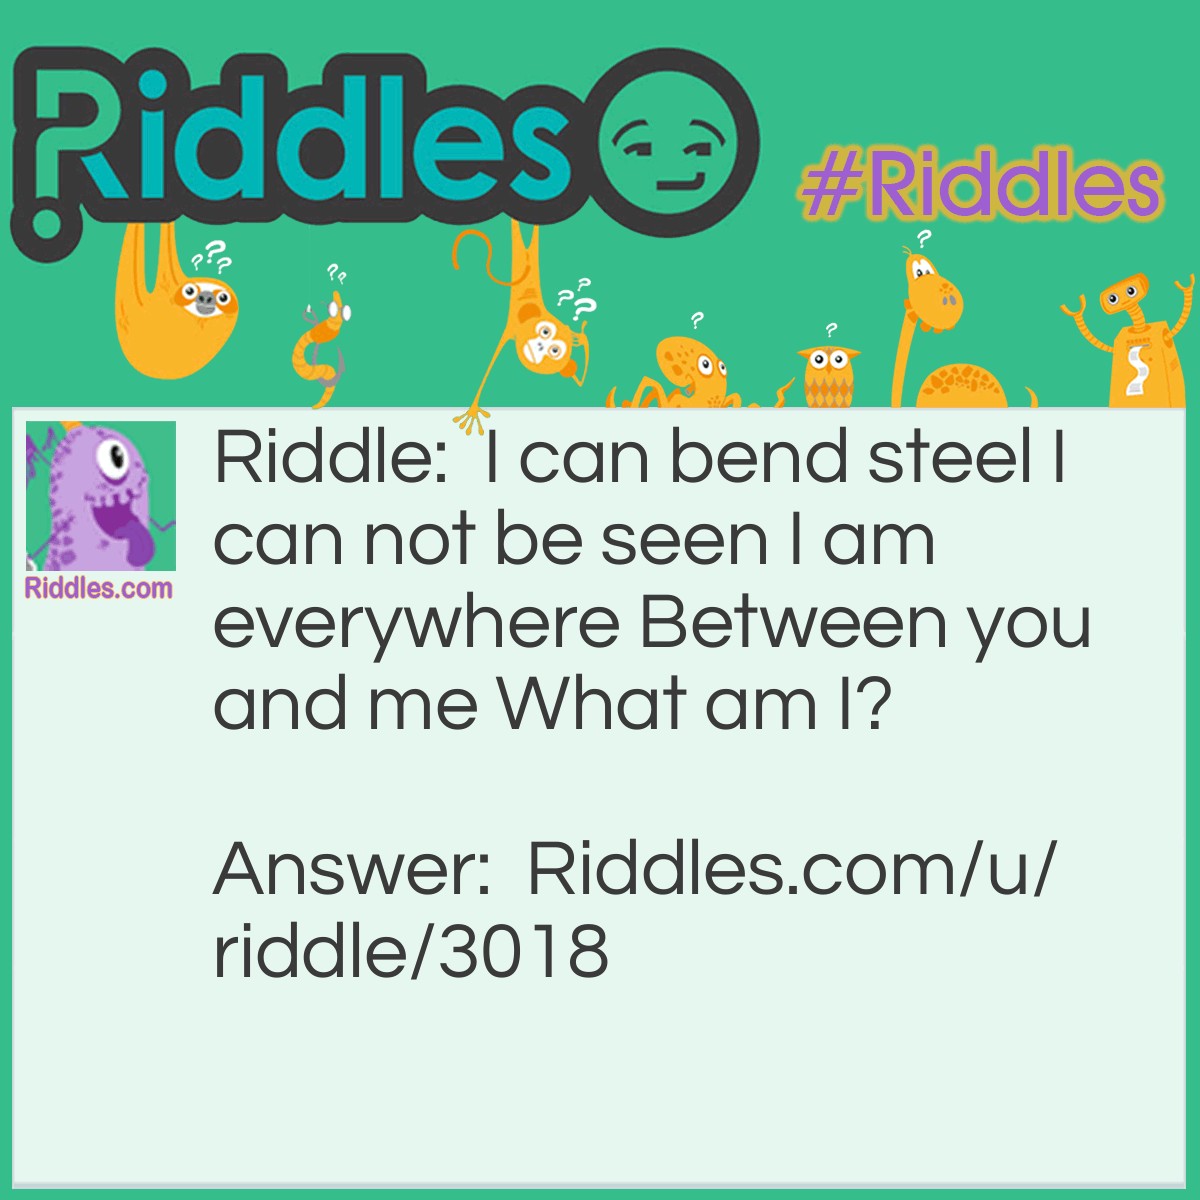 Riddle: I can bend steel I can not be seen I am everywhere Between you and me. What am I? Answer: Air/wind